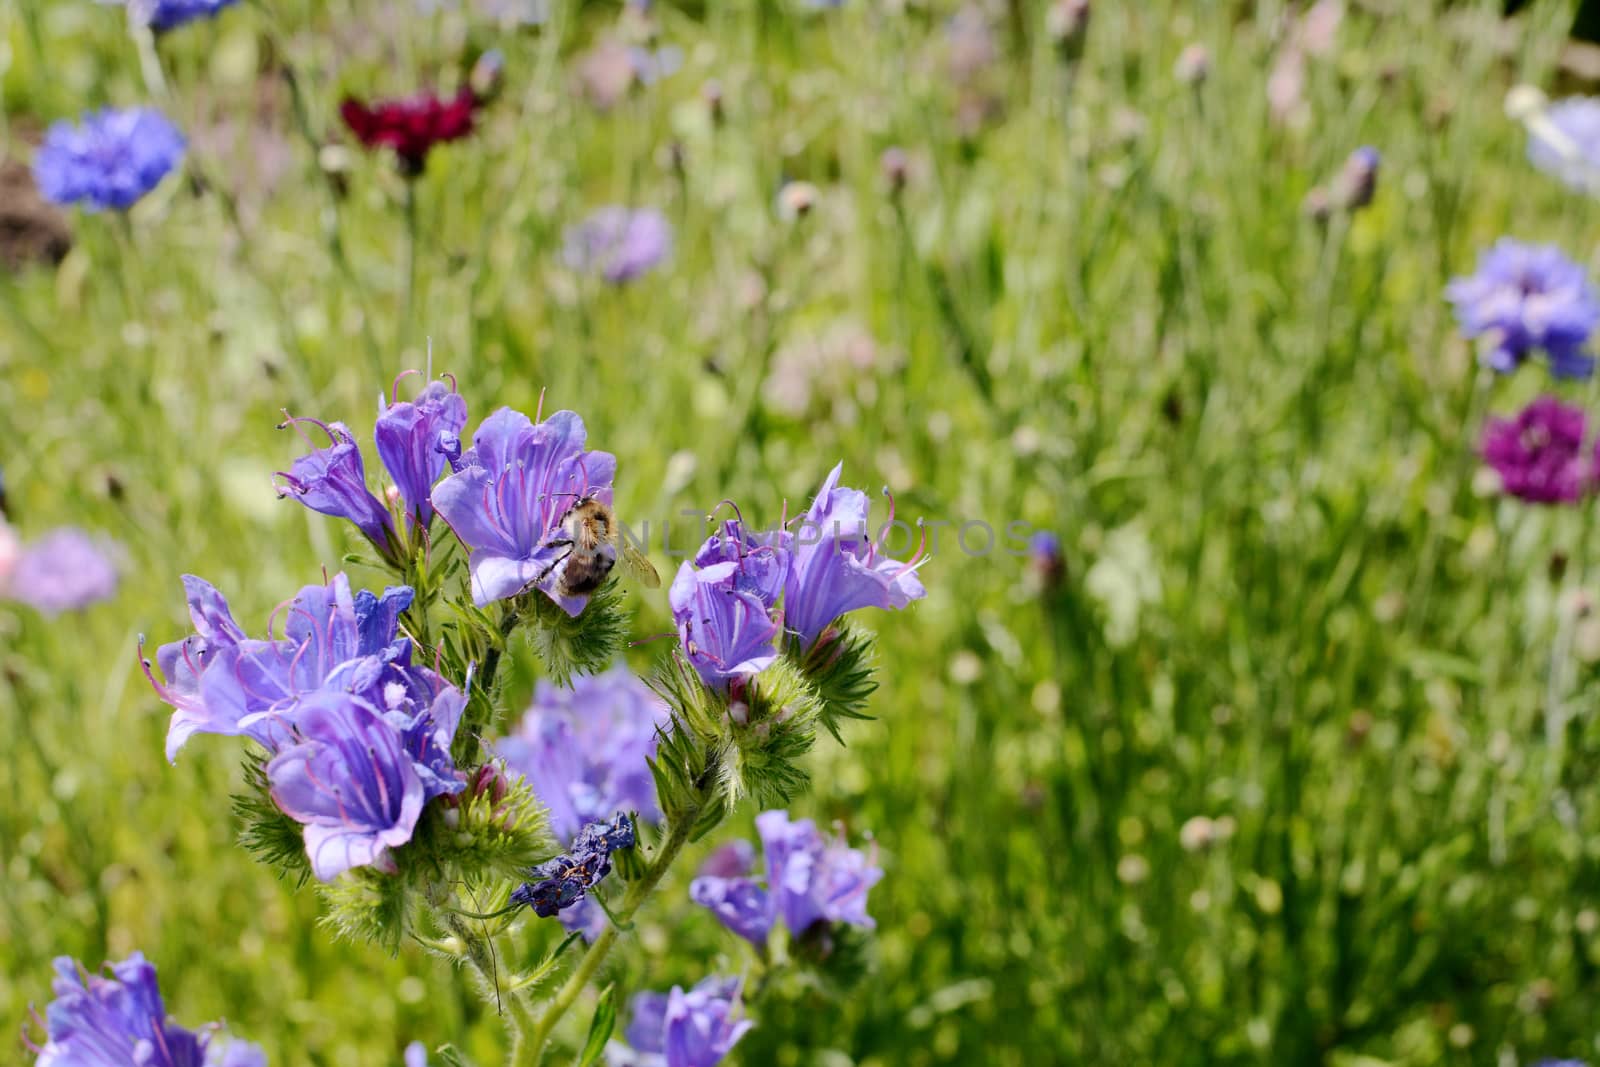 Close-up of a shrill carder bee gathering nectar and pollen from blue viper's bugloss flowers; copy space on wildflowers